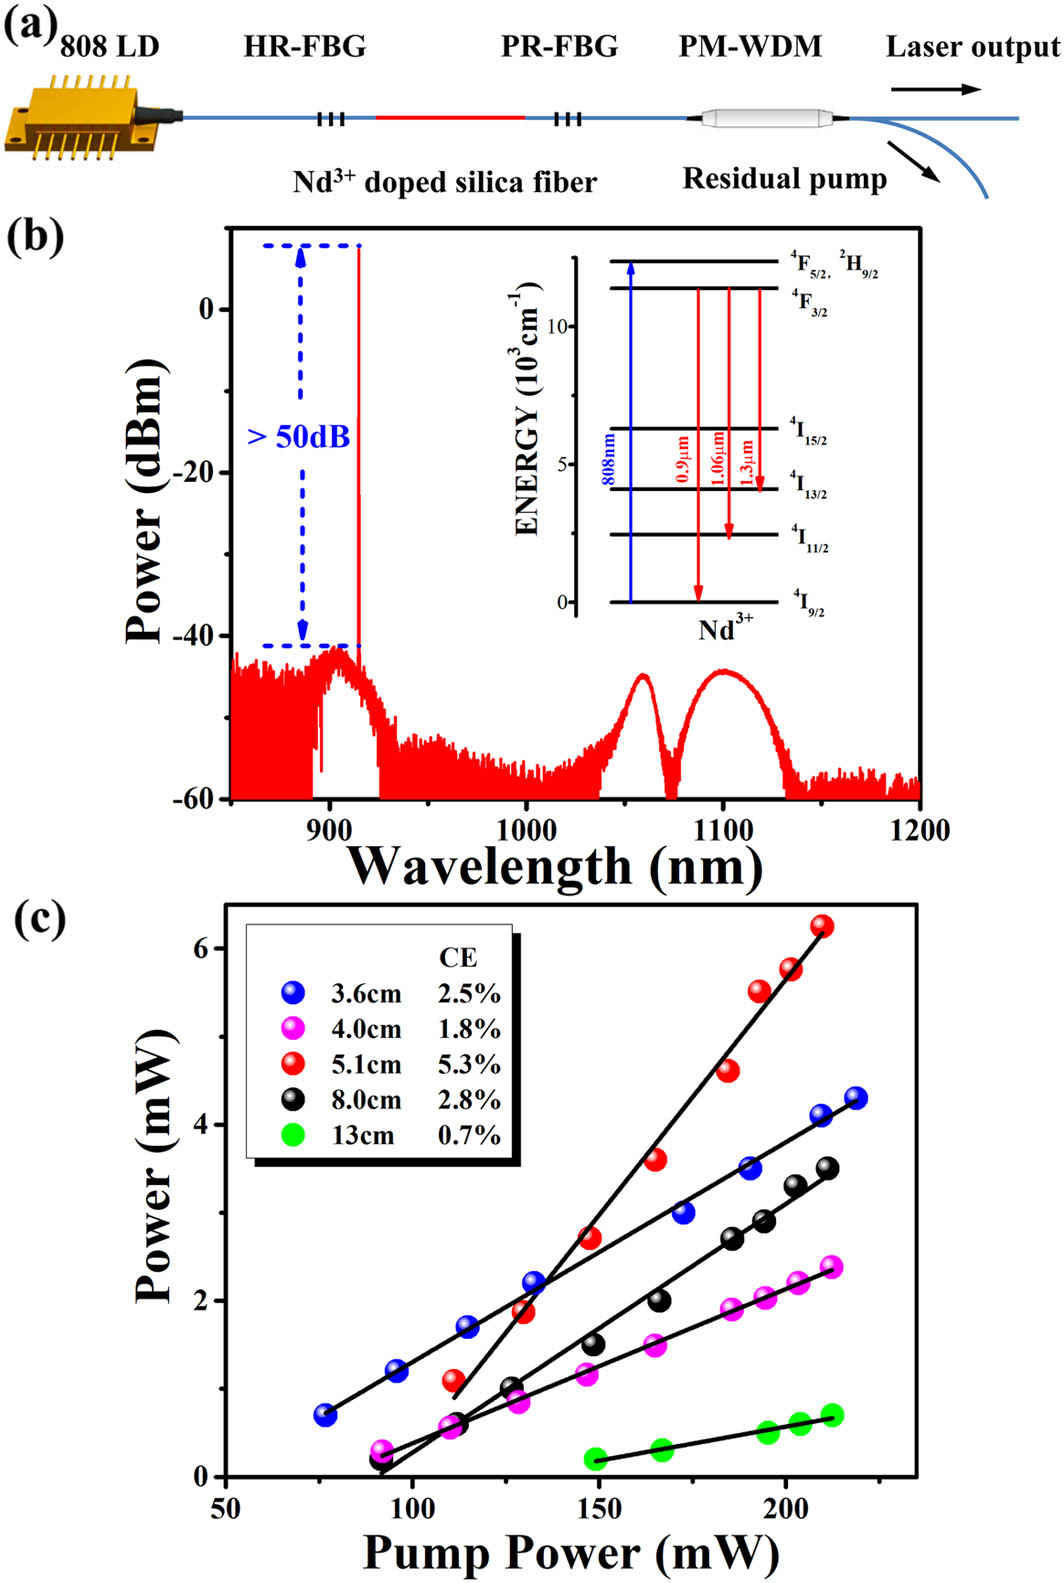 (a) The experimental setup of 915 nm Nd3+-doped silica fiber laser. (b) 915 nm laser spectrum of Nd3+-doped silica fiber. The inset is the energy level of Nd3+. (c) The laser output power with different lengths of gain fiber versus pump power (CE: optical-to-optical conversion efficiency).